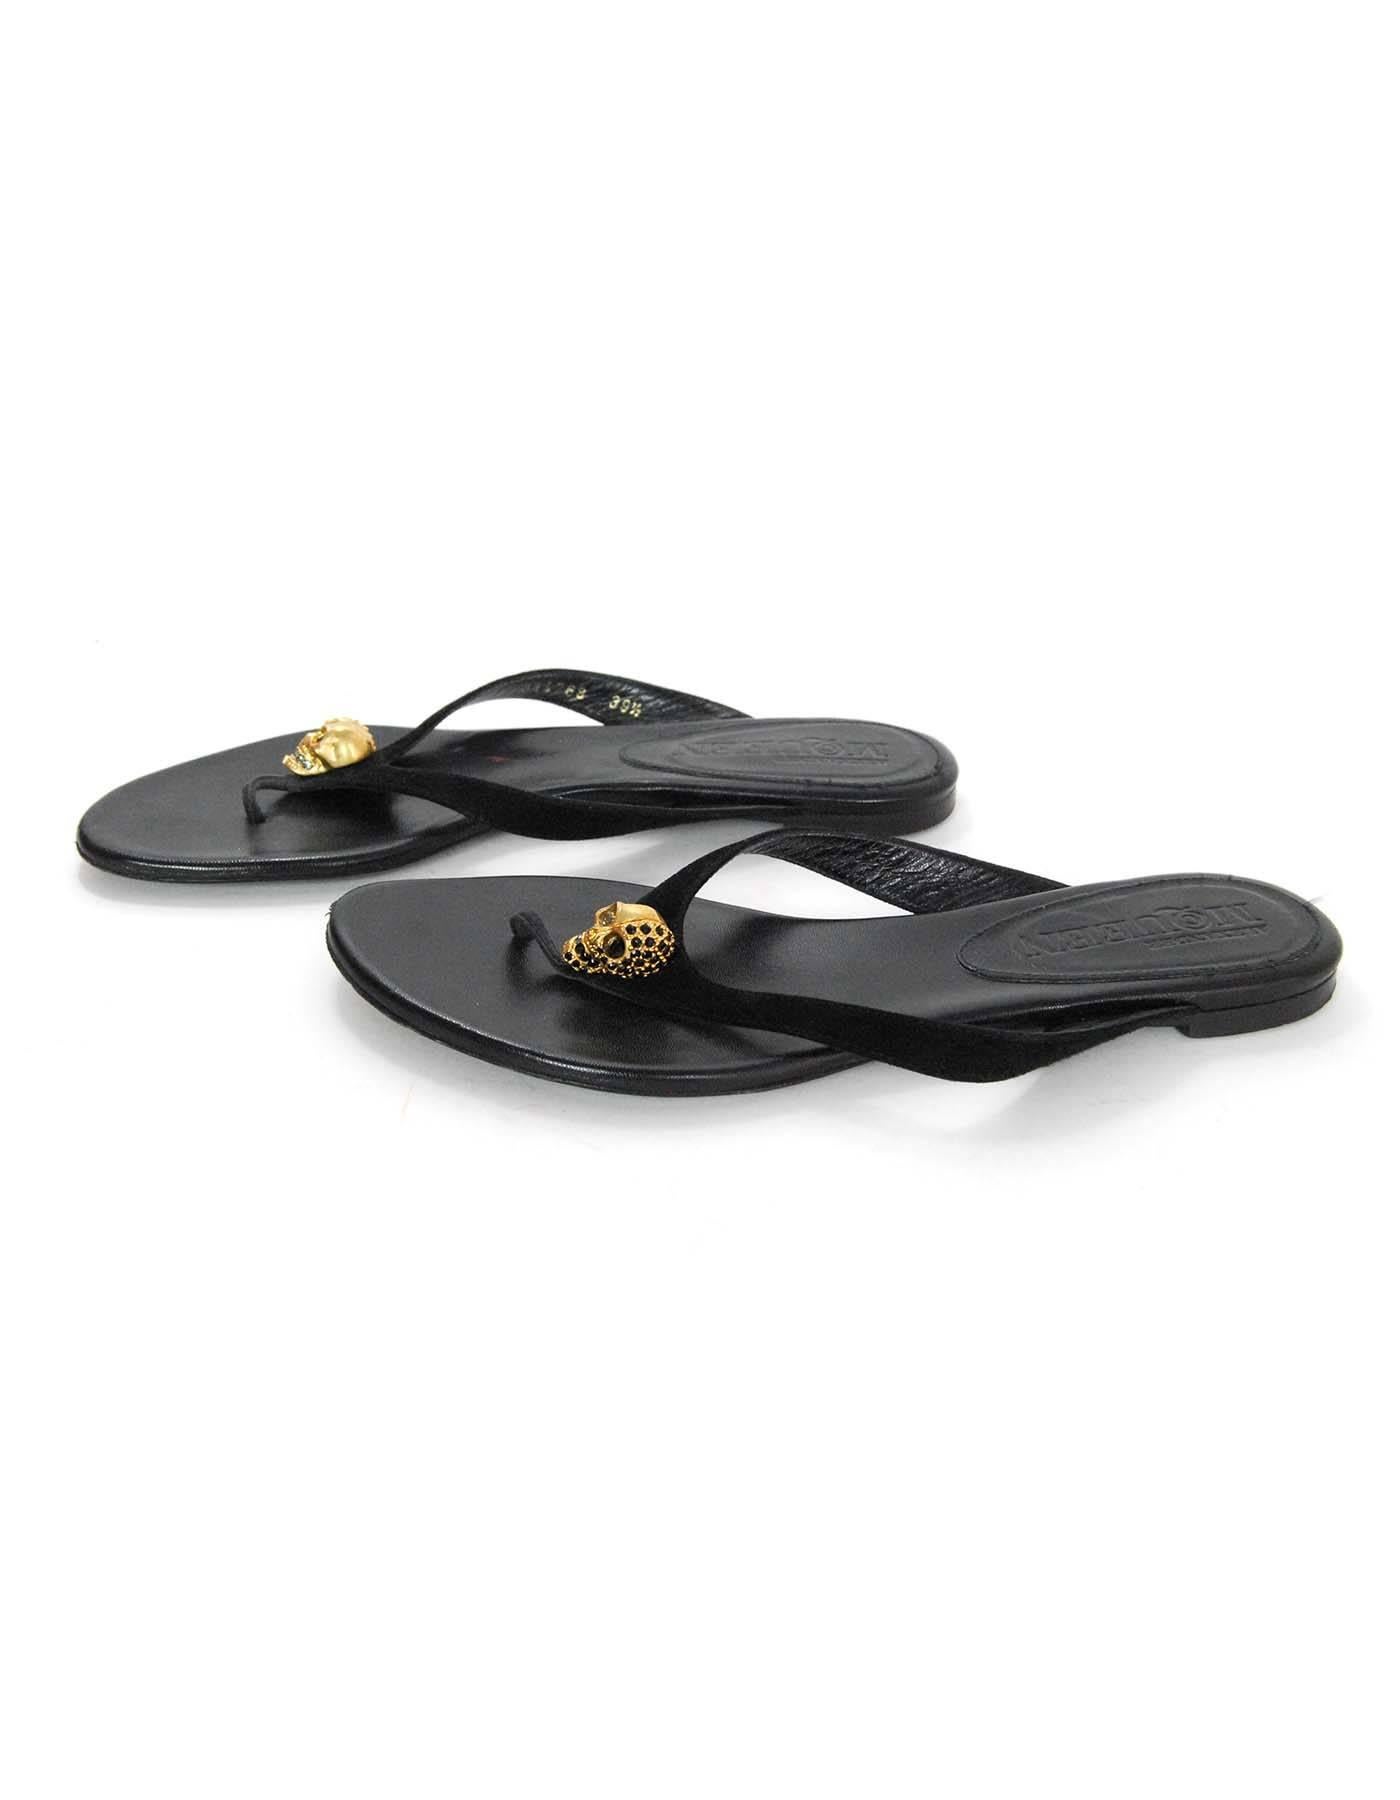 Alexander McQueen Black Suede Skull Sandals Sz 39.5

Features goldtone skull with black and white rhinestones

Made In: Italy
Color: Black and gold
Materials: Leather and suede
Closure/Opening: Slide on
Sole Stamp: Made in Italy 39.5 Vero